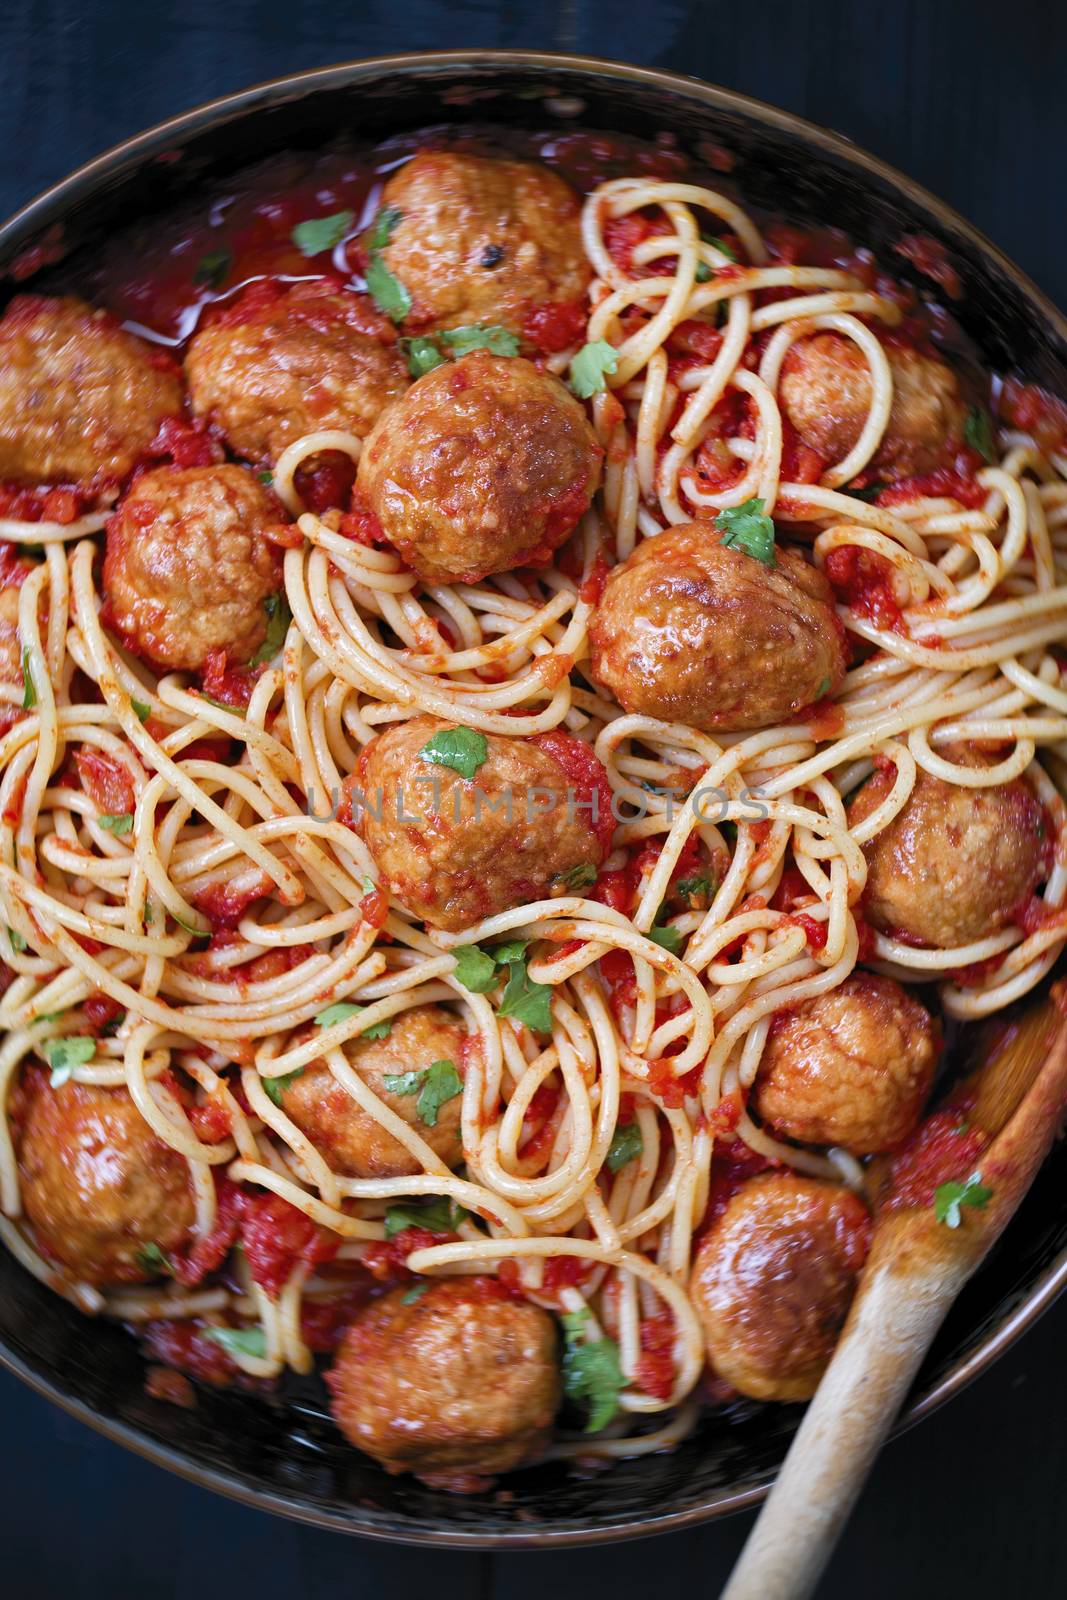 rustic meatball spaghetti in tomato sauce by zkruger